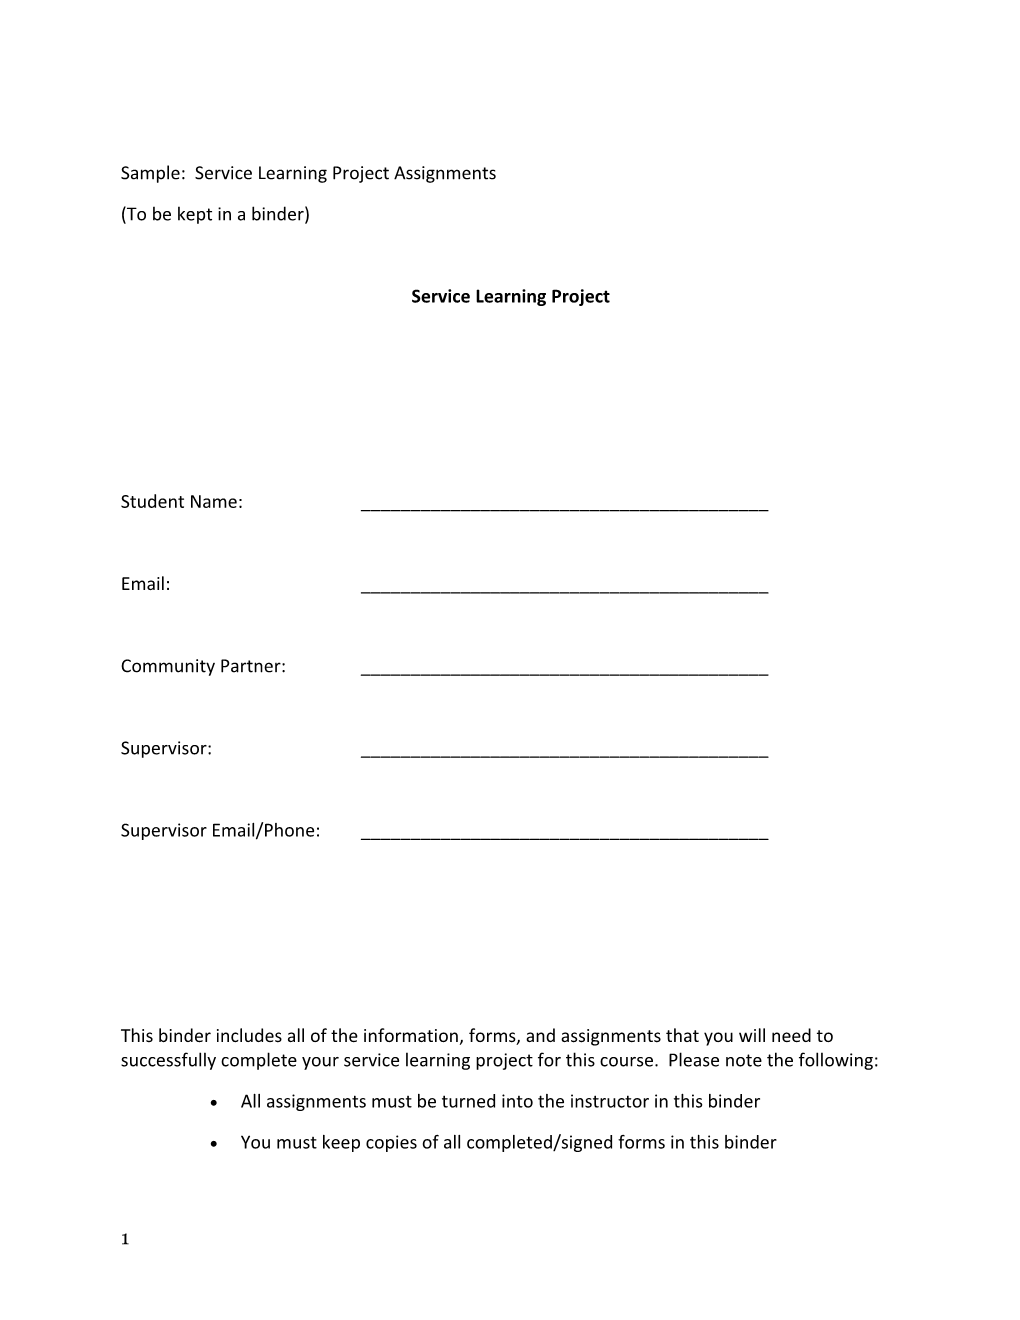 Sample Service Learning Project Assignments